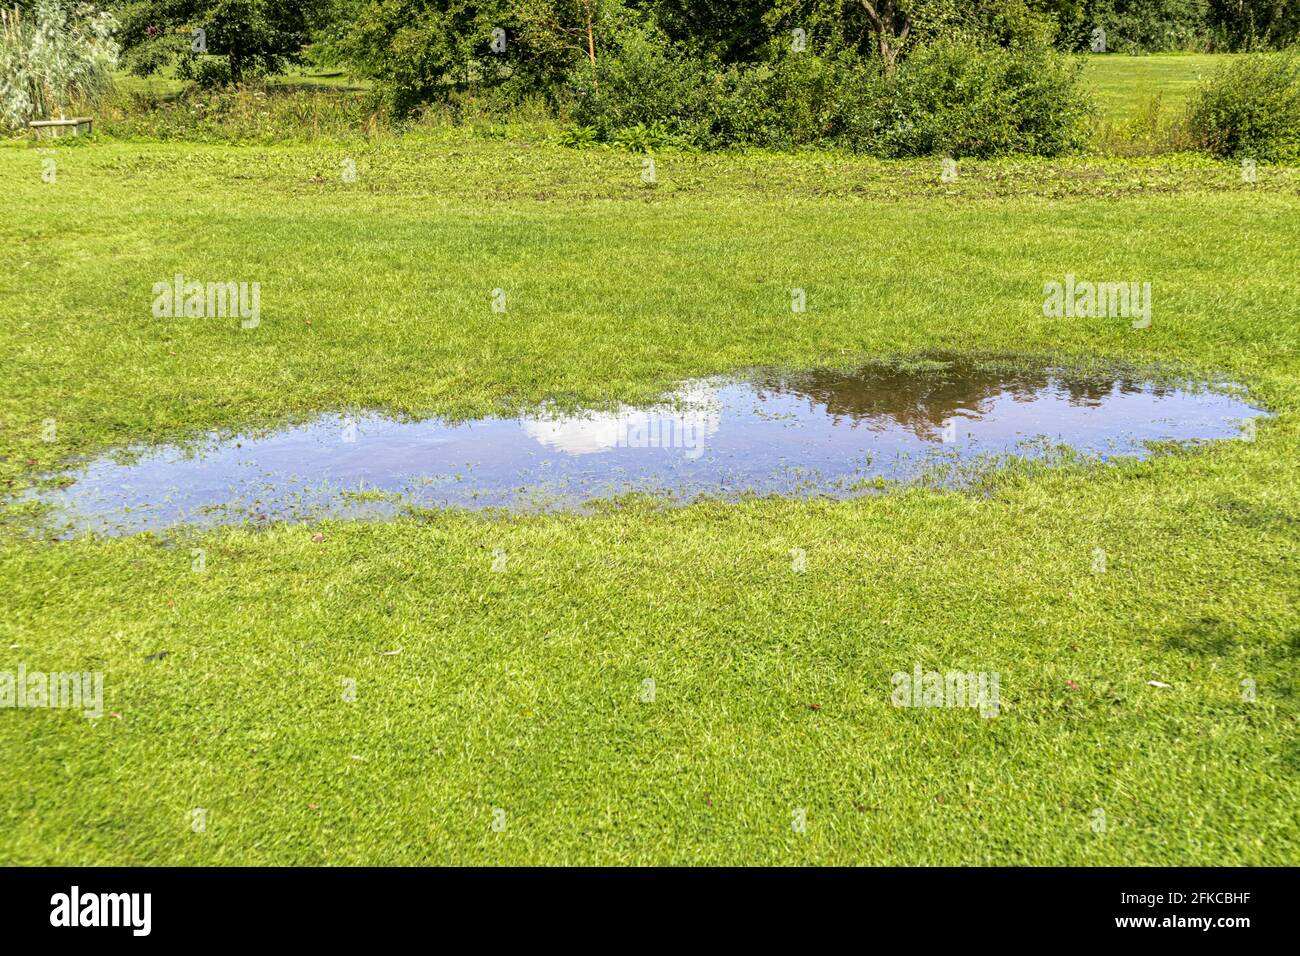 The sky and a cloud reflected in a large puddle on a patch of grass Stock Photo